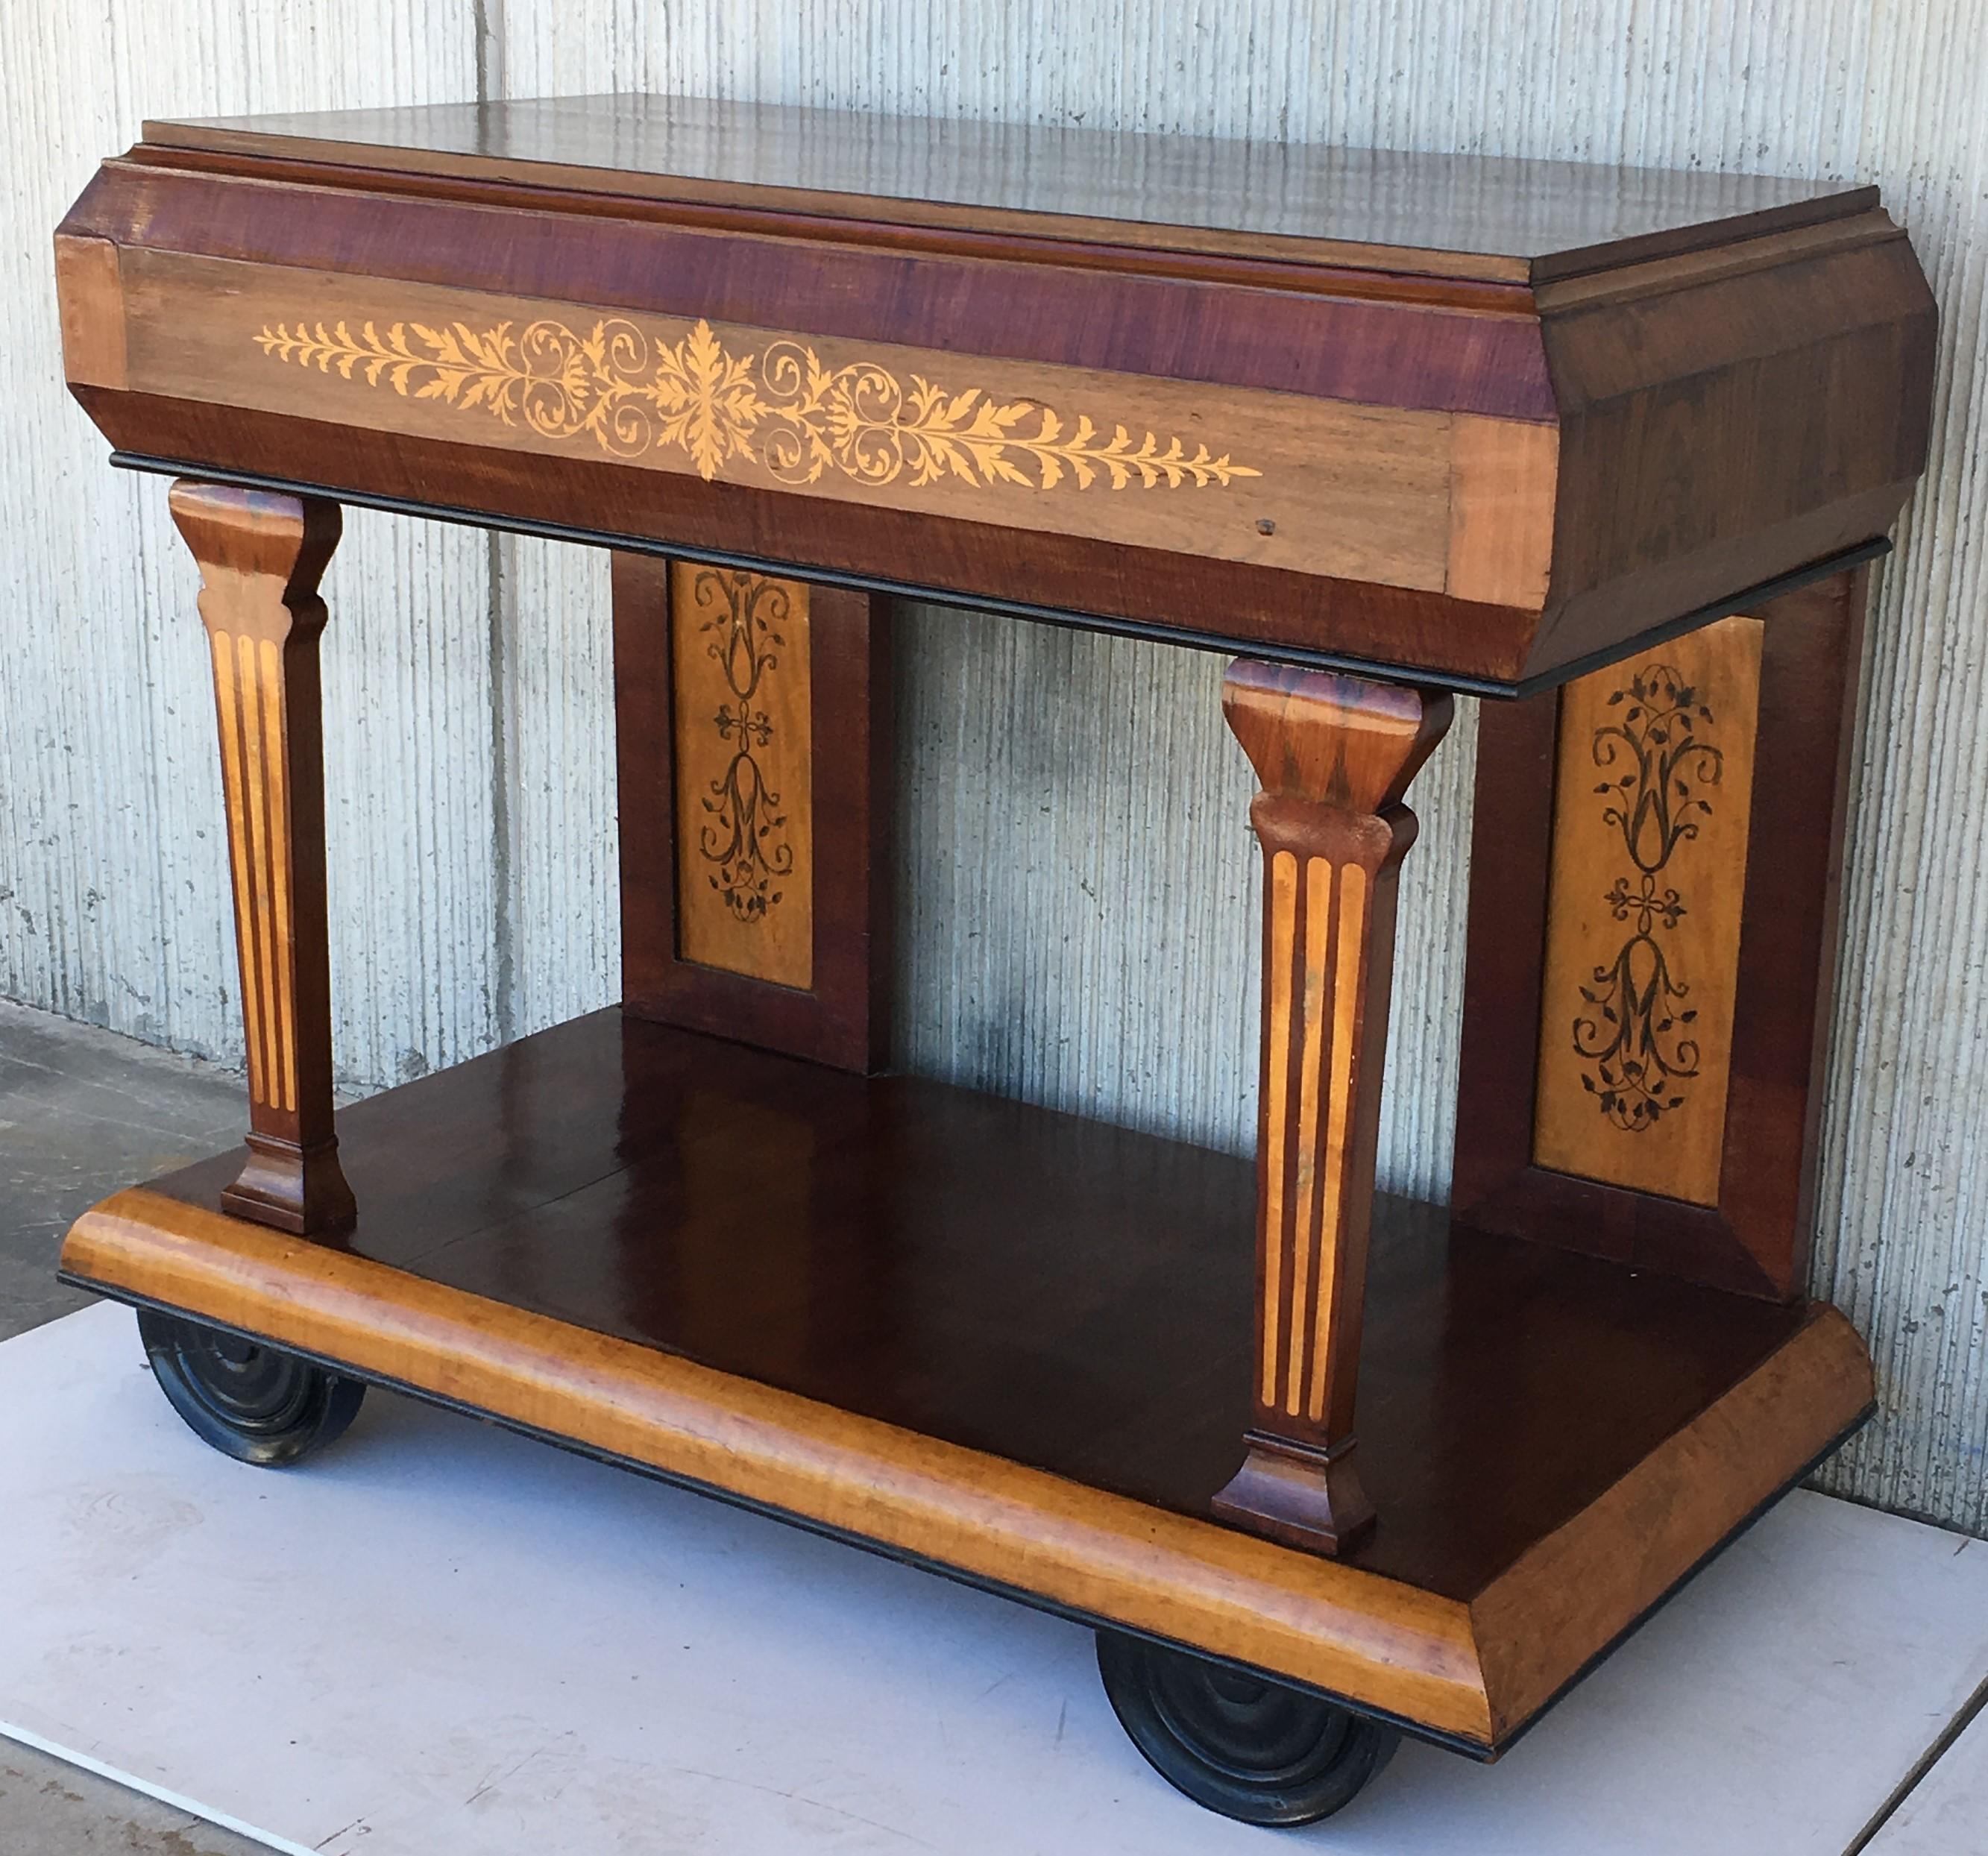 1830s French Empire Marquetry Console Table in Rosewood and Maple For Sale 1